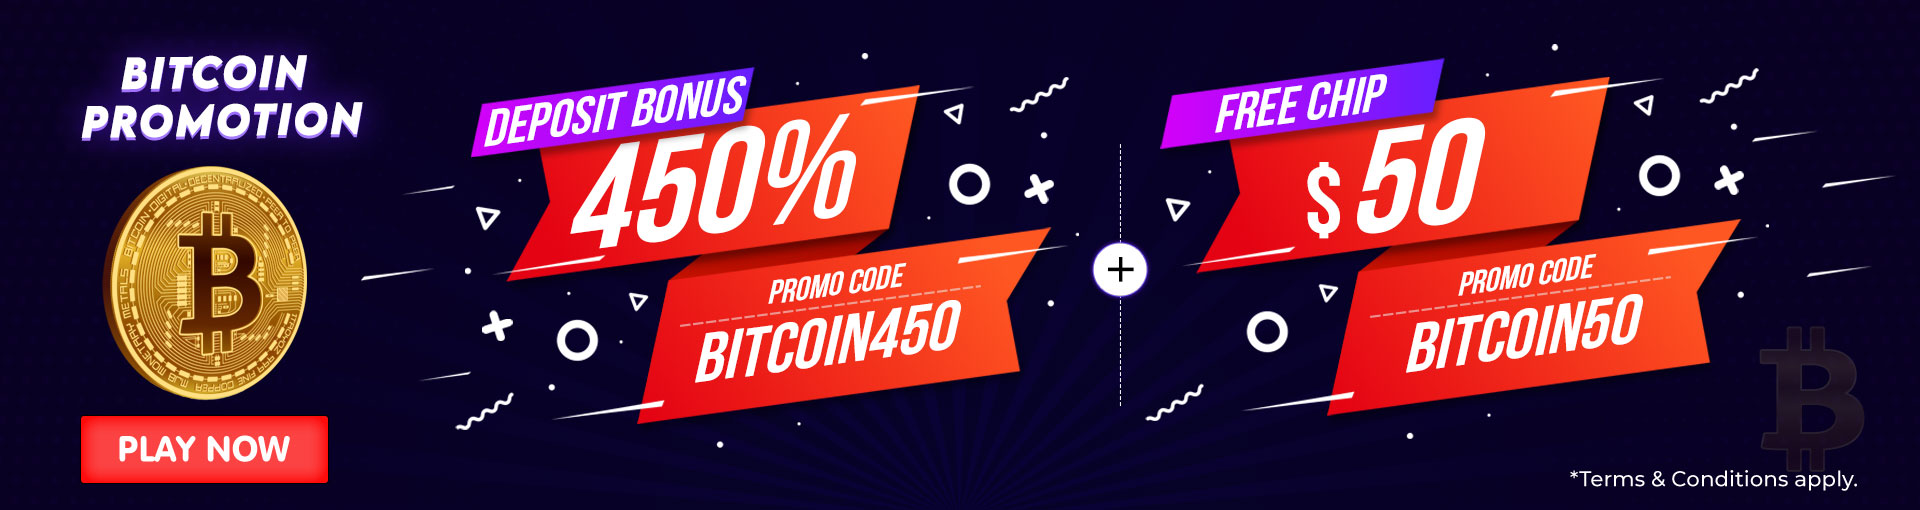 Bitcoin Promotion